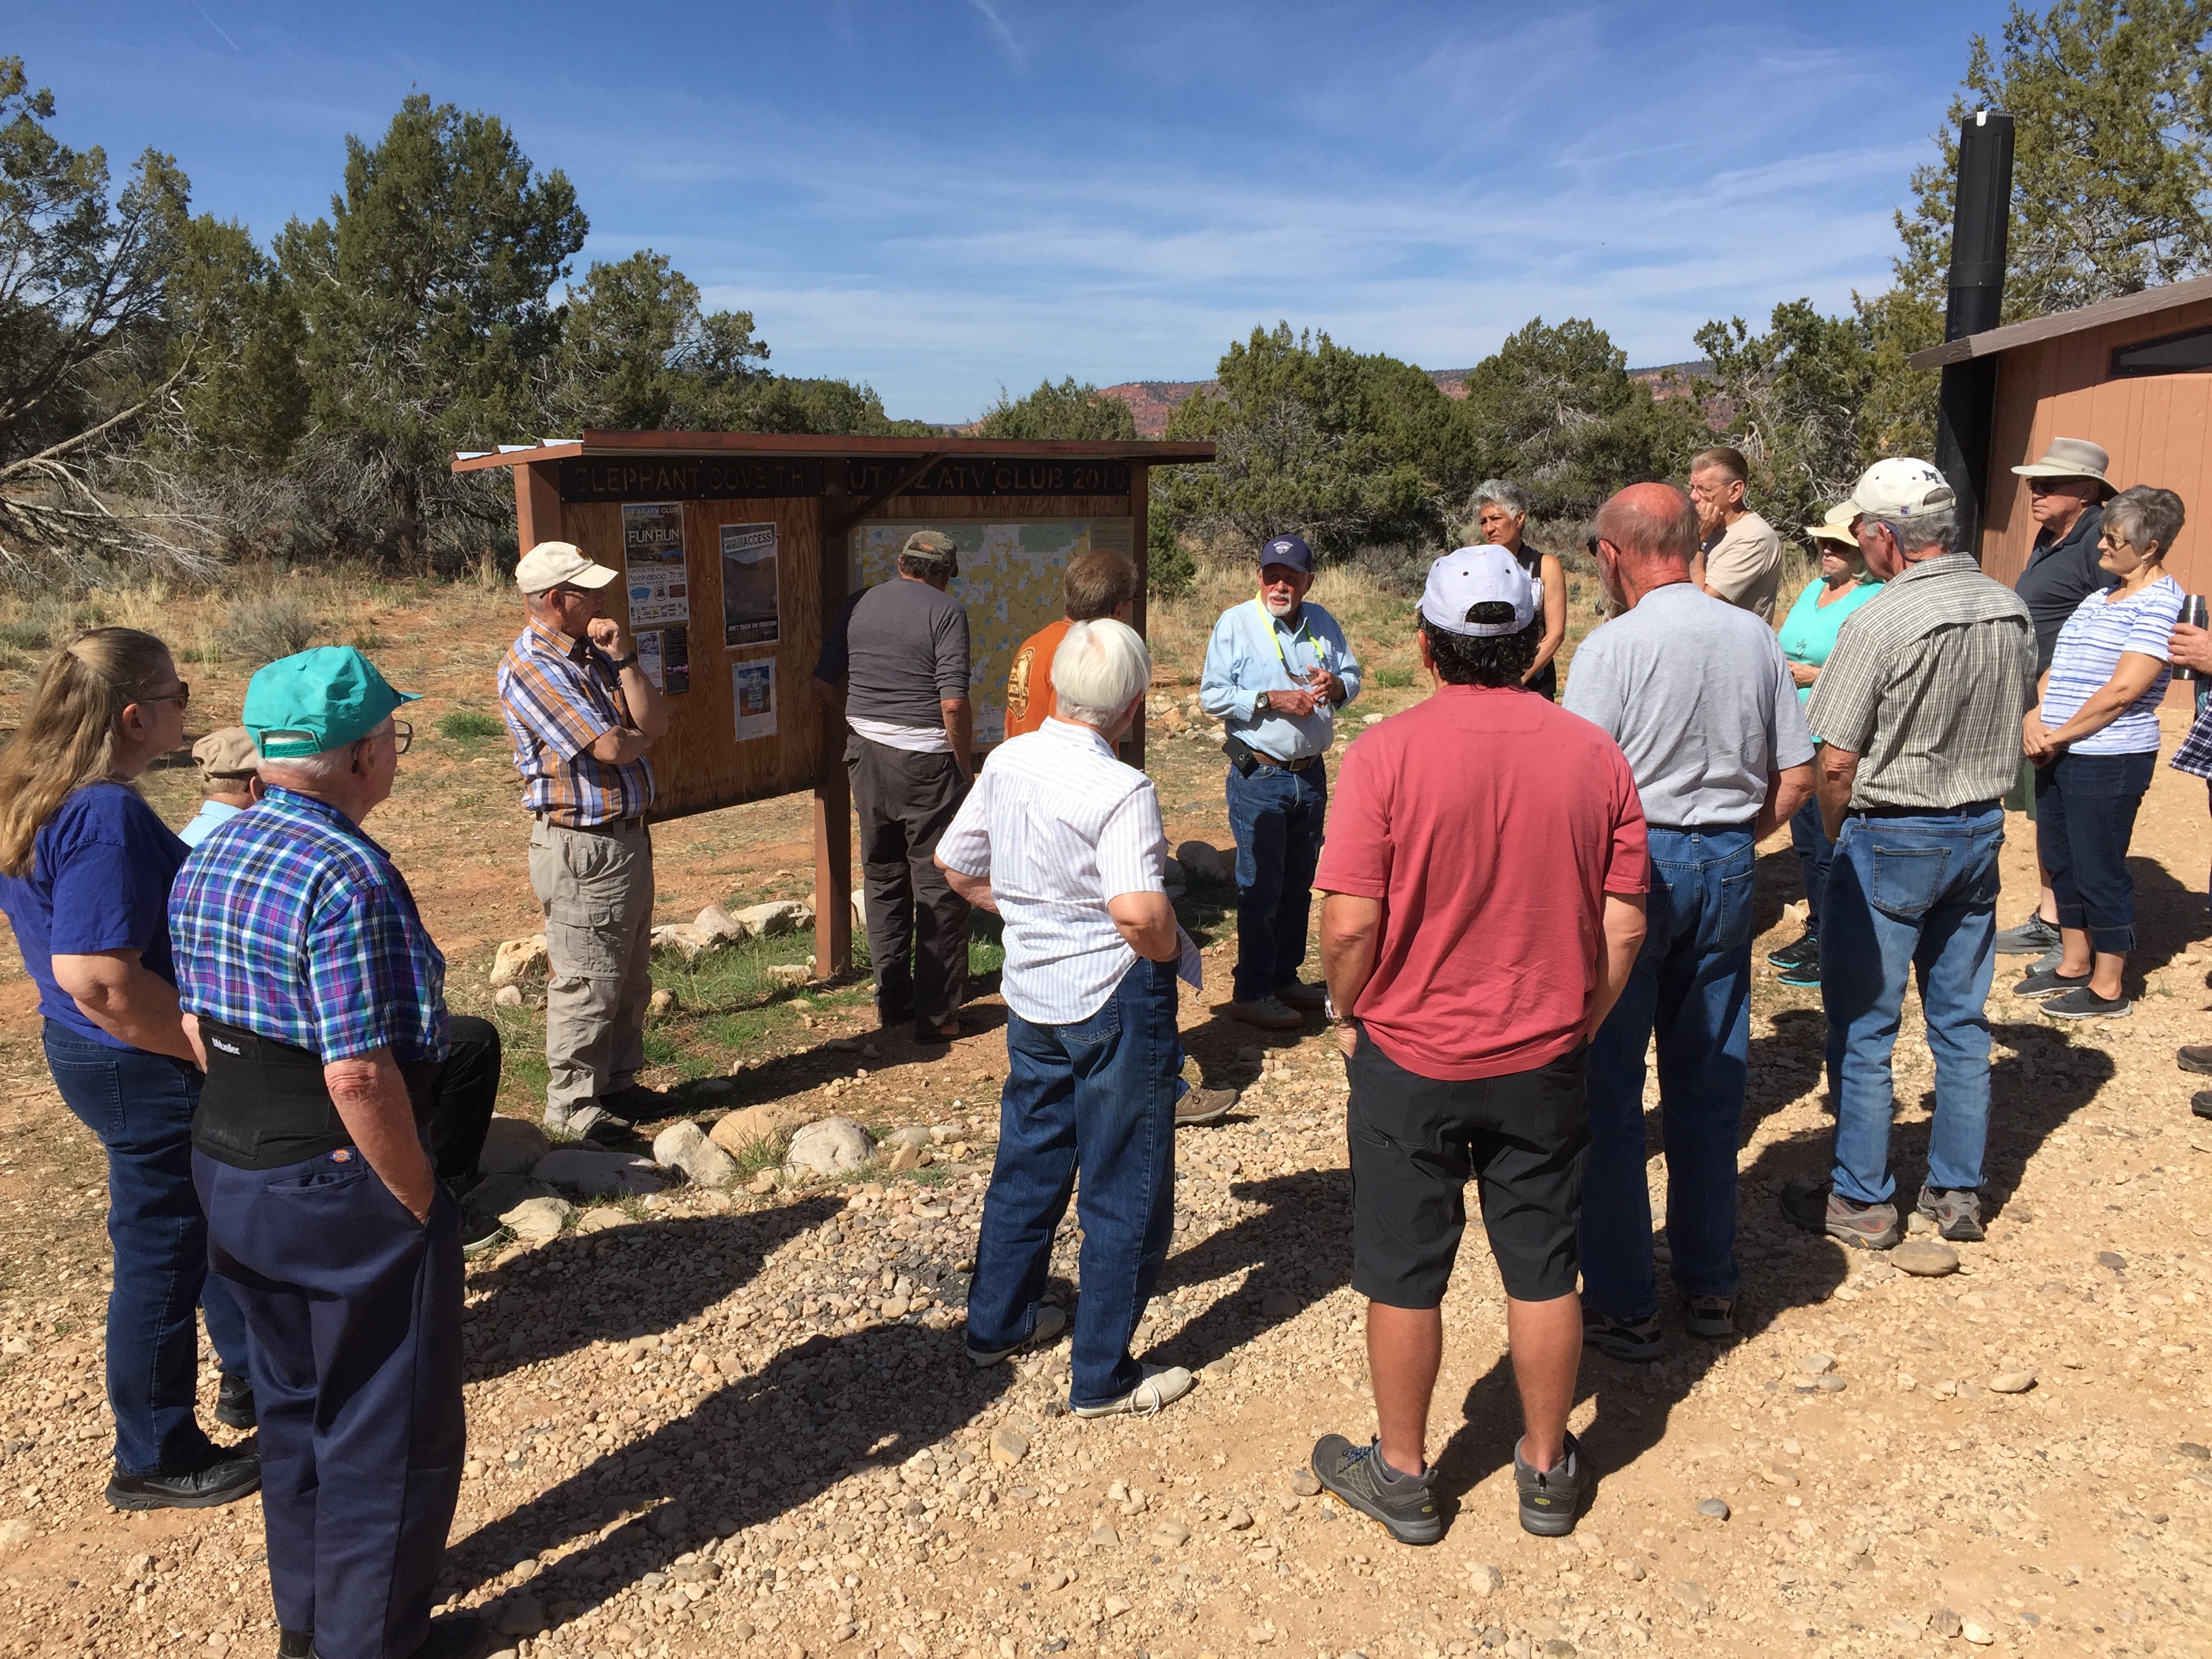 Milt Hokanson talking to a group of DASIA field trip attendees at the Elephant Cove Kiosk